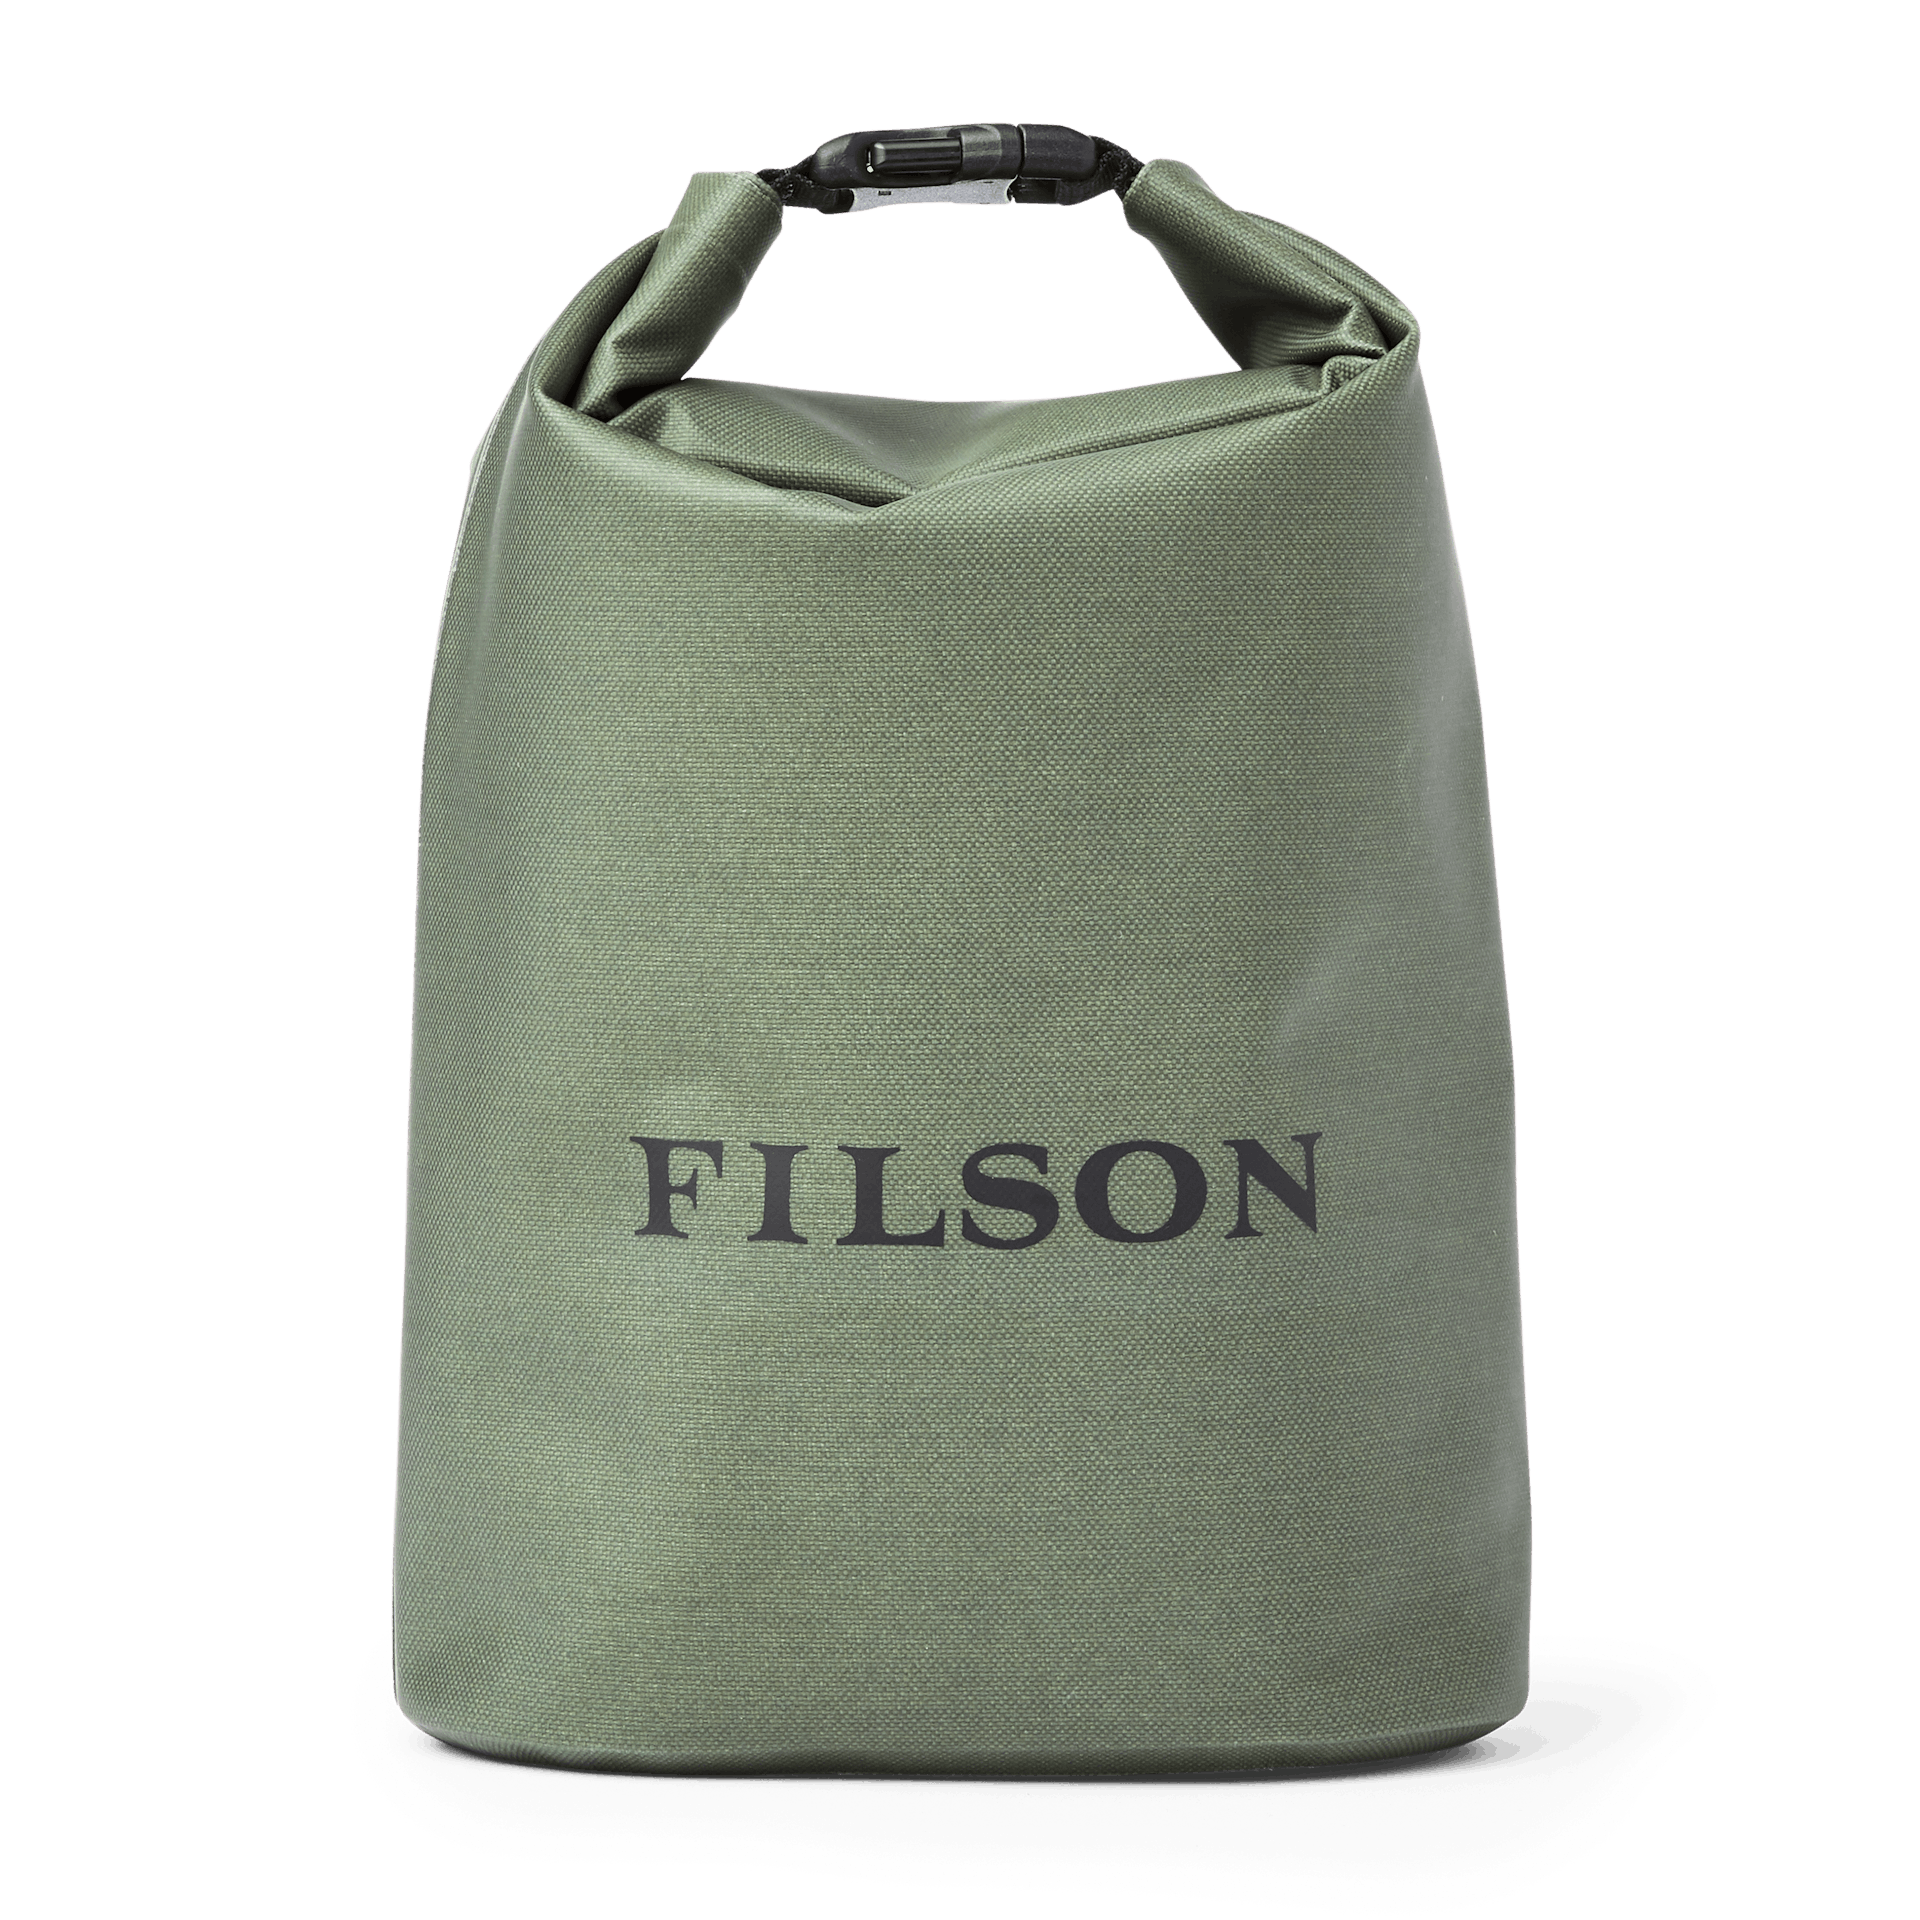 Filson  Logo Green White Outdoor Hunting Clothing  Fish Sticker Decal Approx 7”